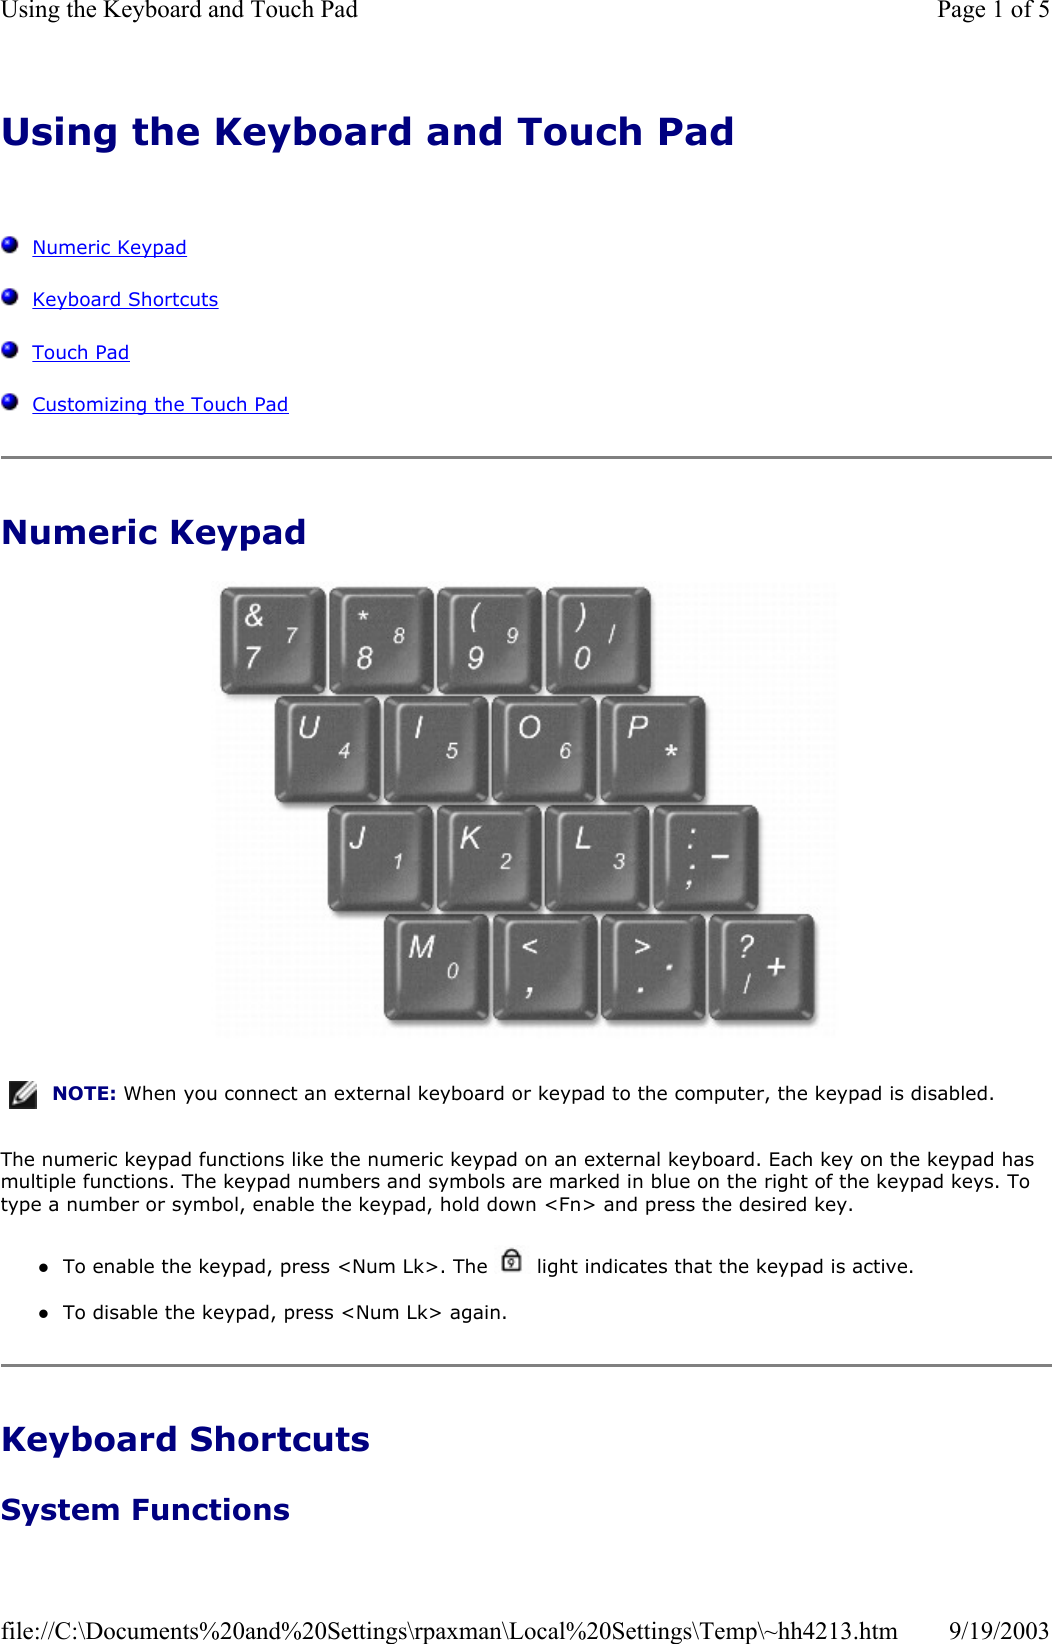 Using the Keyboard and Touch Pad      Numeric Keypad   Keyboard Shortcuts   Touch Pad   Customizing the Touch Pad Numeric Keypad   The numeric keypad functions like the numeric keypad on an external keyboard. Each key on the keypad has multiple functions. The keypad numbers and symbols are marked in blue on the right of the keypad keys. To type a number or symbol, enable the keypad, hold down &lt;Fn&gt; and press the desired key. zTo enable the keypad, press &lt;Num Lk&gt;. The   light indicates that the keypad is active.  zTo disable the keypad, press &lt;Num Lk&gt; again.  Keyboard Shortcuts System Functions NOTE: When you connect an external keyboard or keypad to the computer, the keypad is disabled.Page 1 of 5Using the Keyboard and Touch Pad9/19/2003file://C:\Documents%20and%20Settings\rpaxman\Local%20Settings\Temp\~hh4213.htm